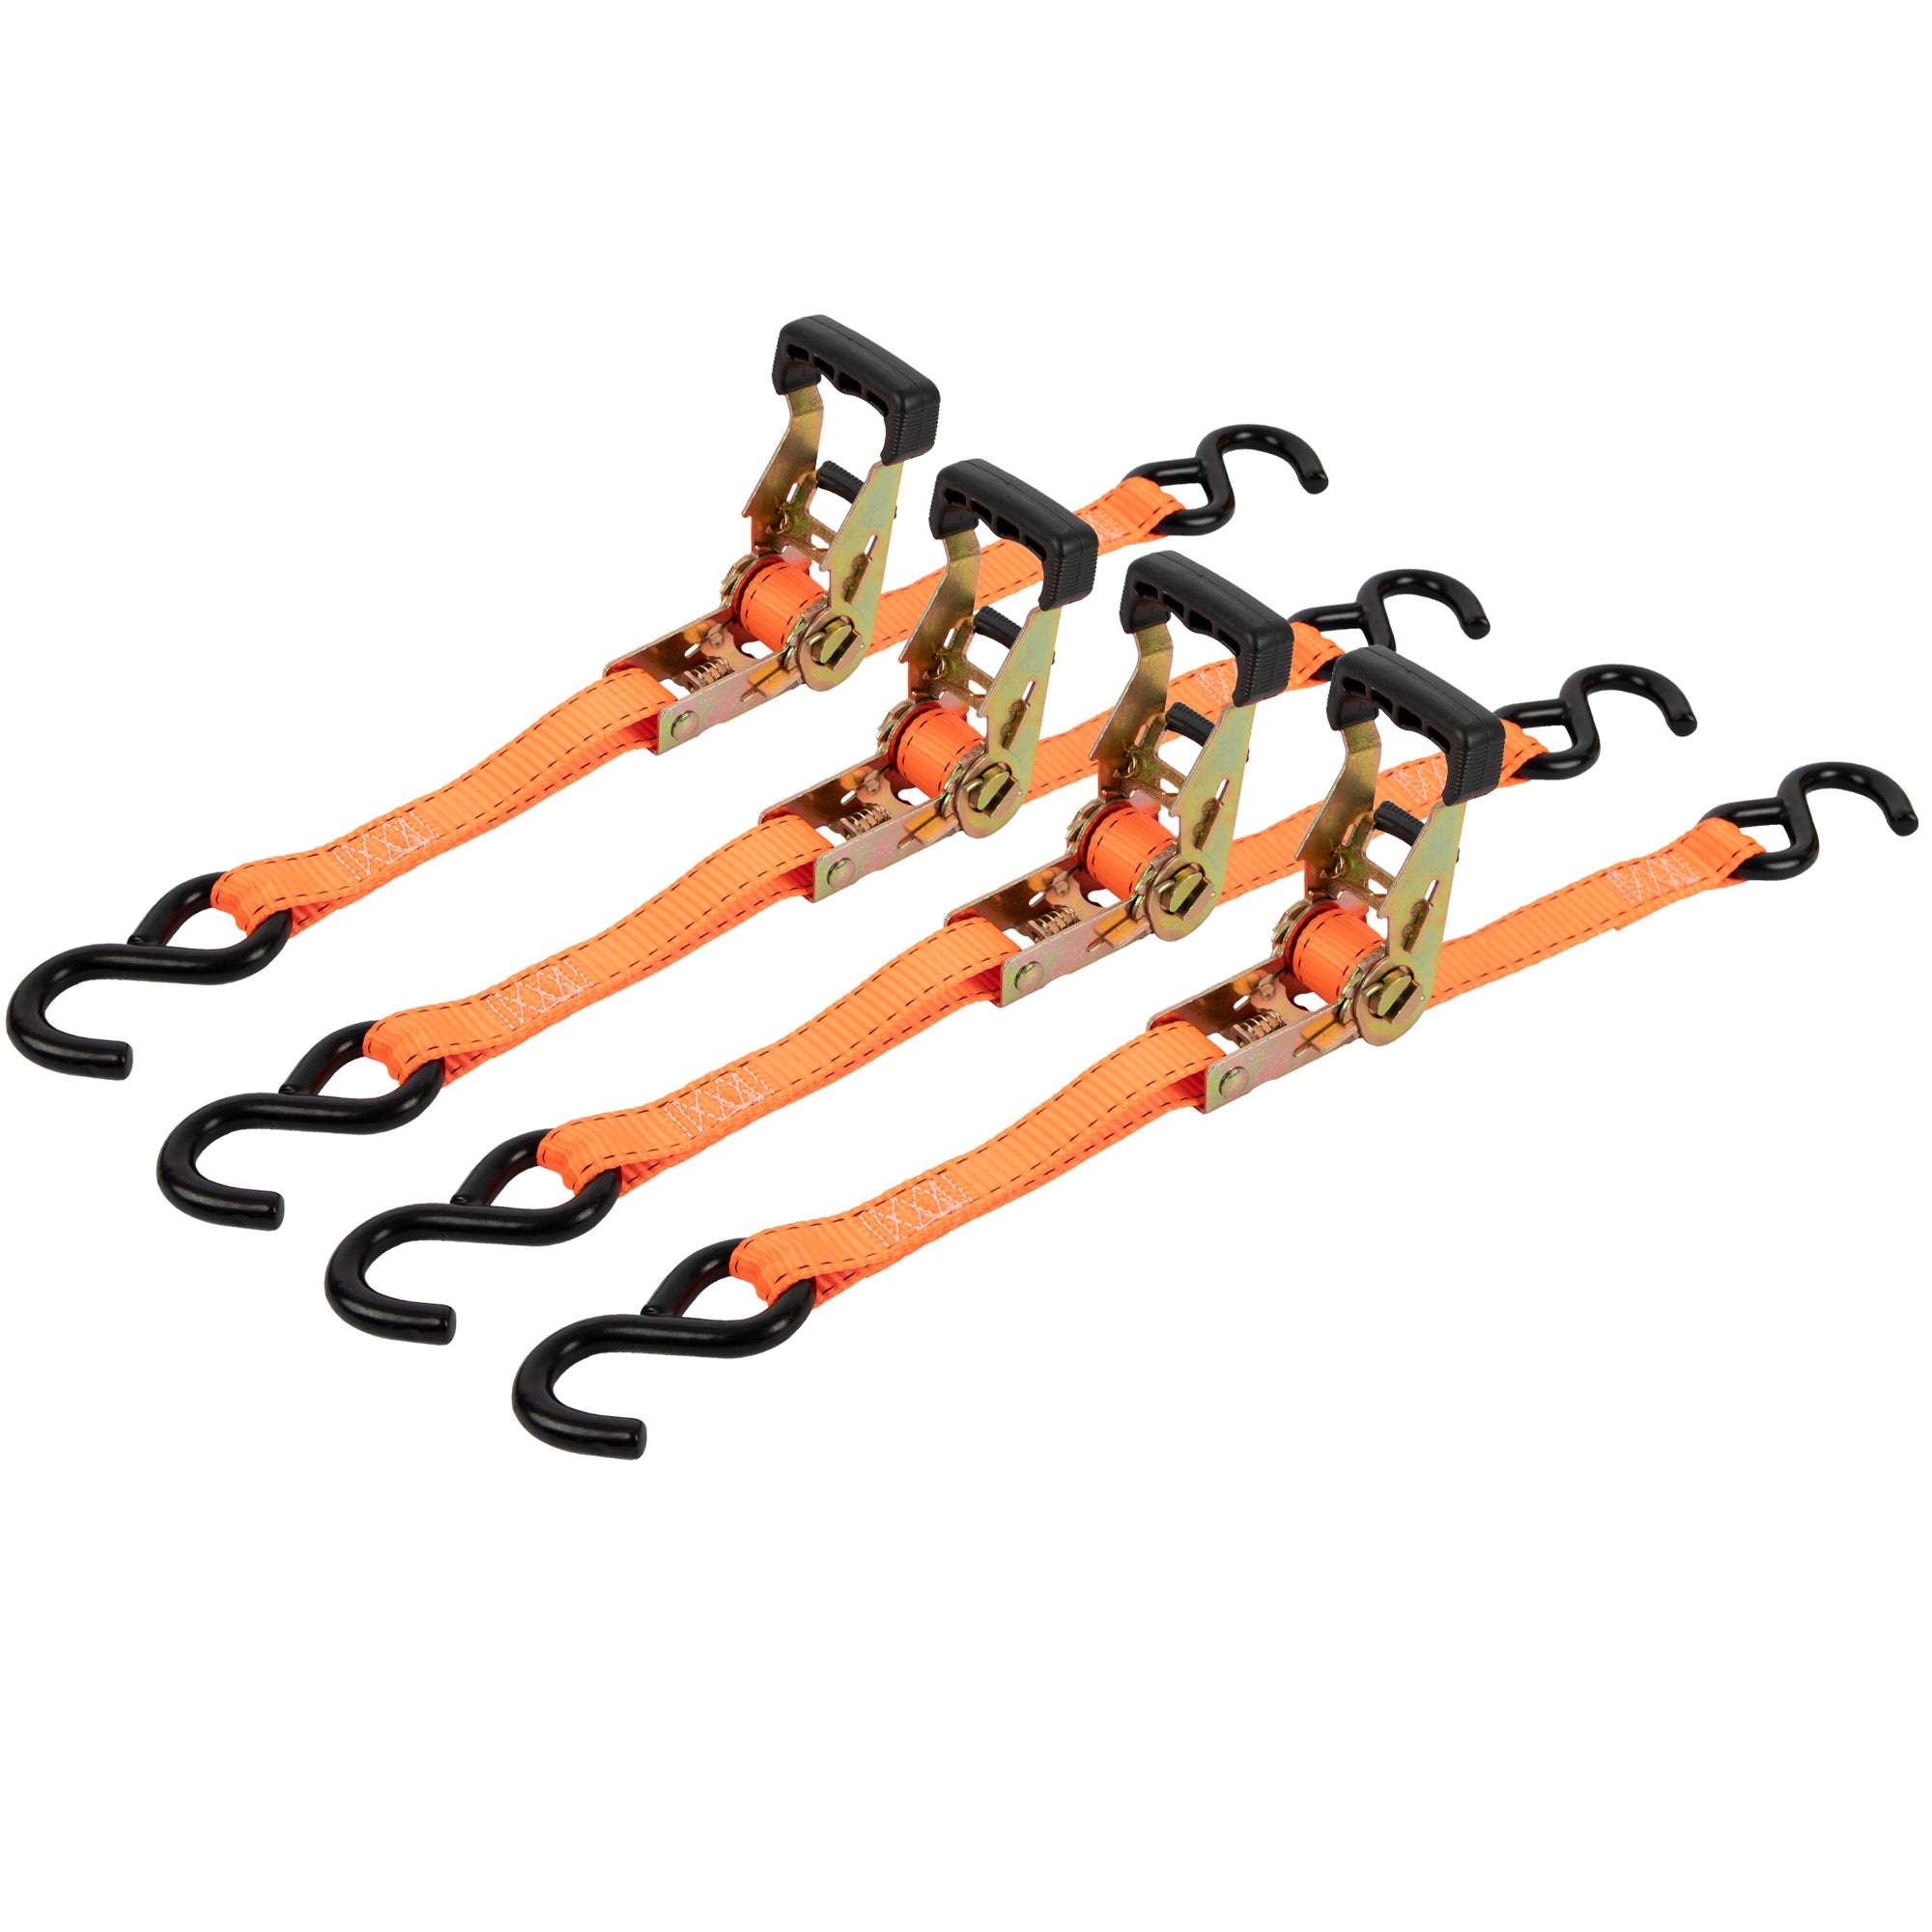 Ratchet Tie Down Straps 1"x15' 2000 lb Load Rating 15' - Pack of 4